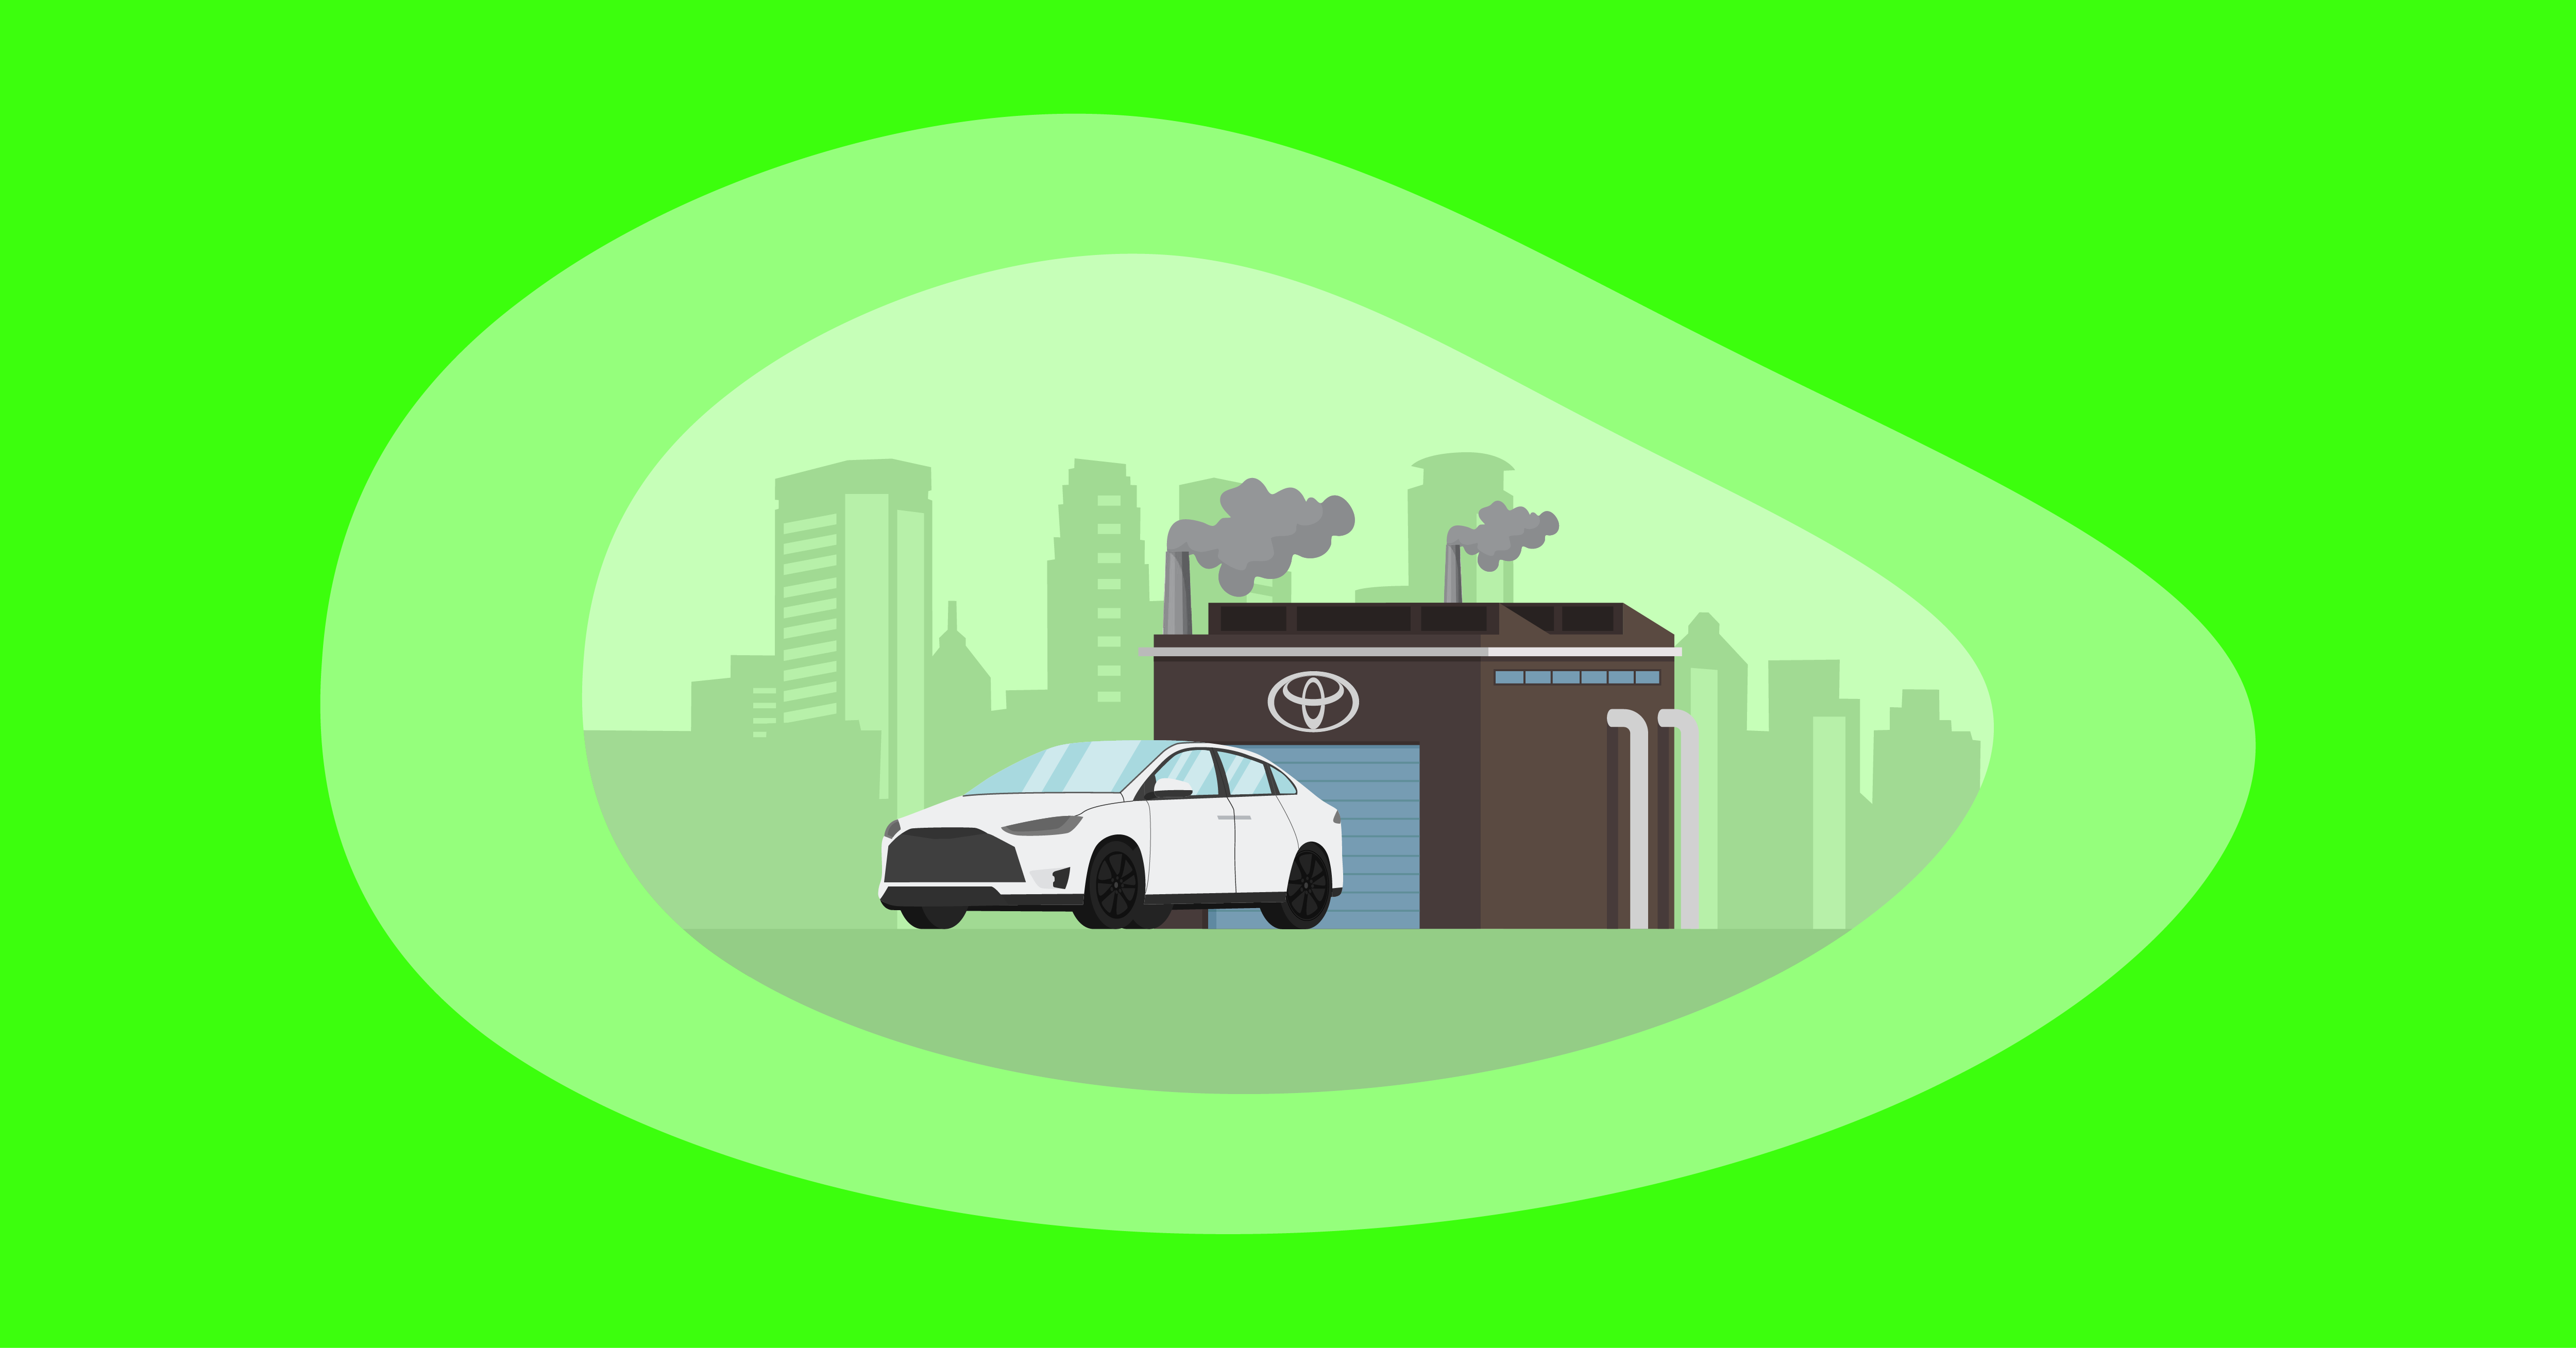 Attempted illustration of a Toyota car in front of a Toyota factory